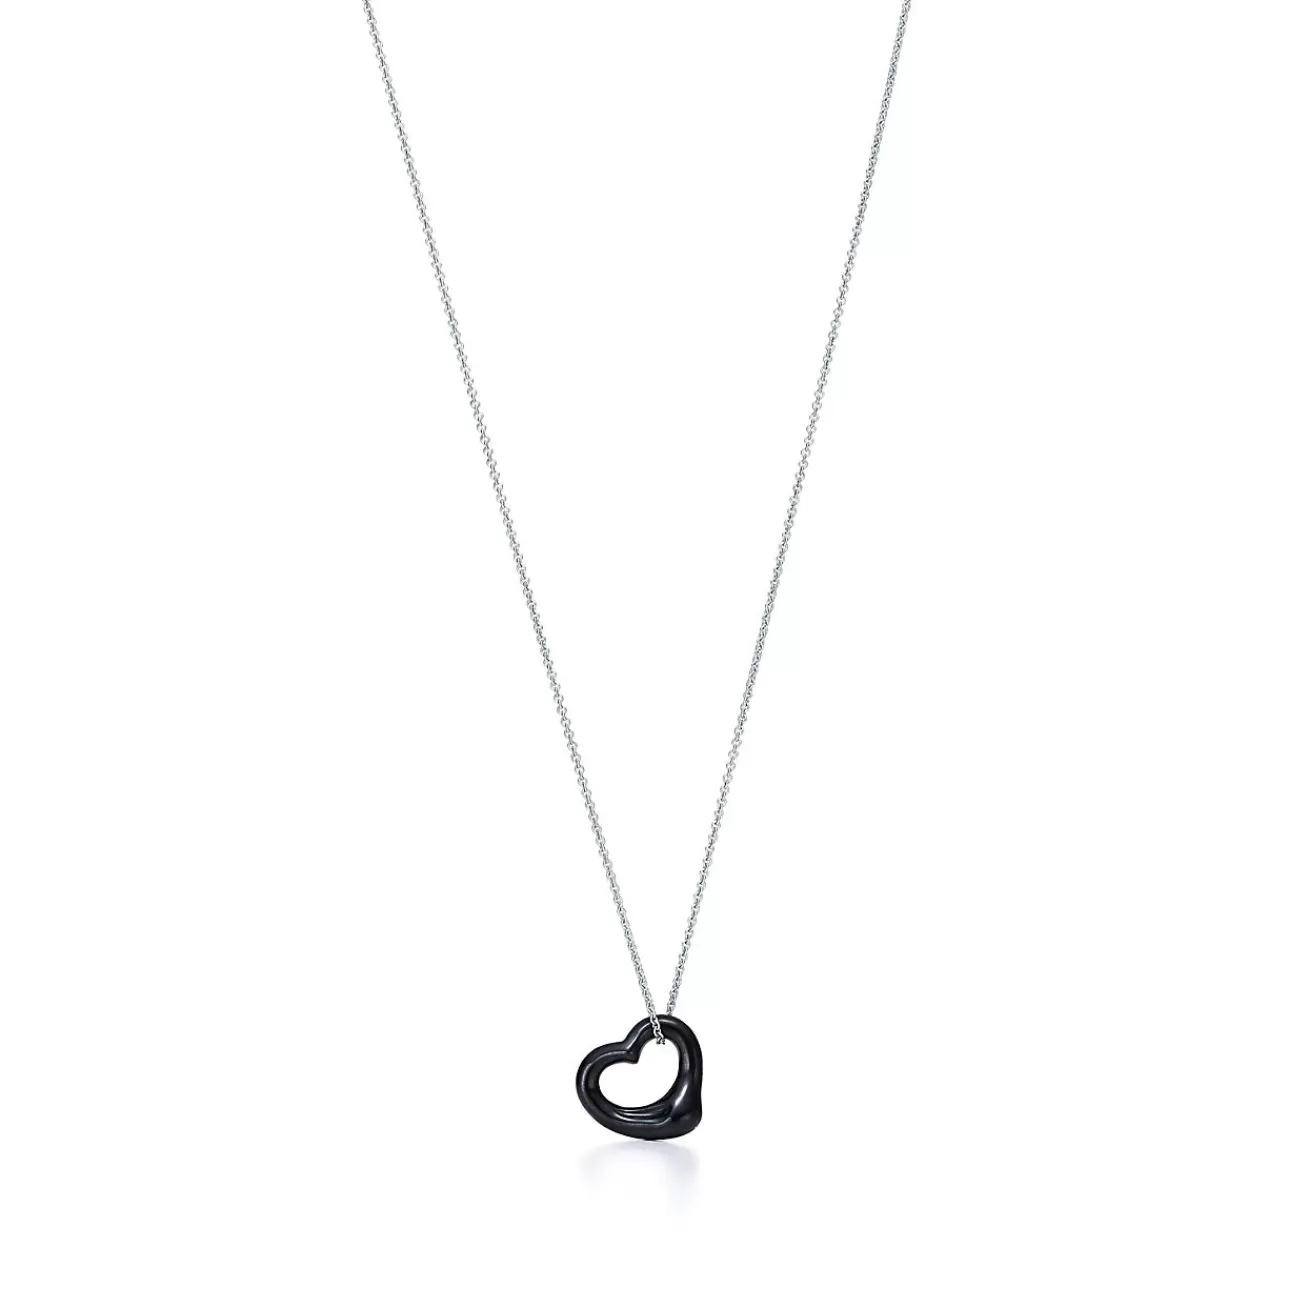 Tiffany & Co. Elsa Peretti® Open Heart pendant of black jade and sterling silver. | ^ Necklaces & Pendants | Sterling Silver Jewelry